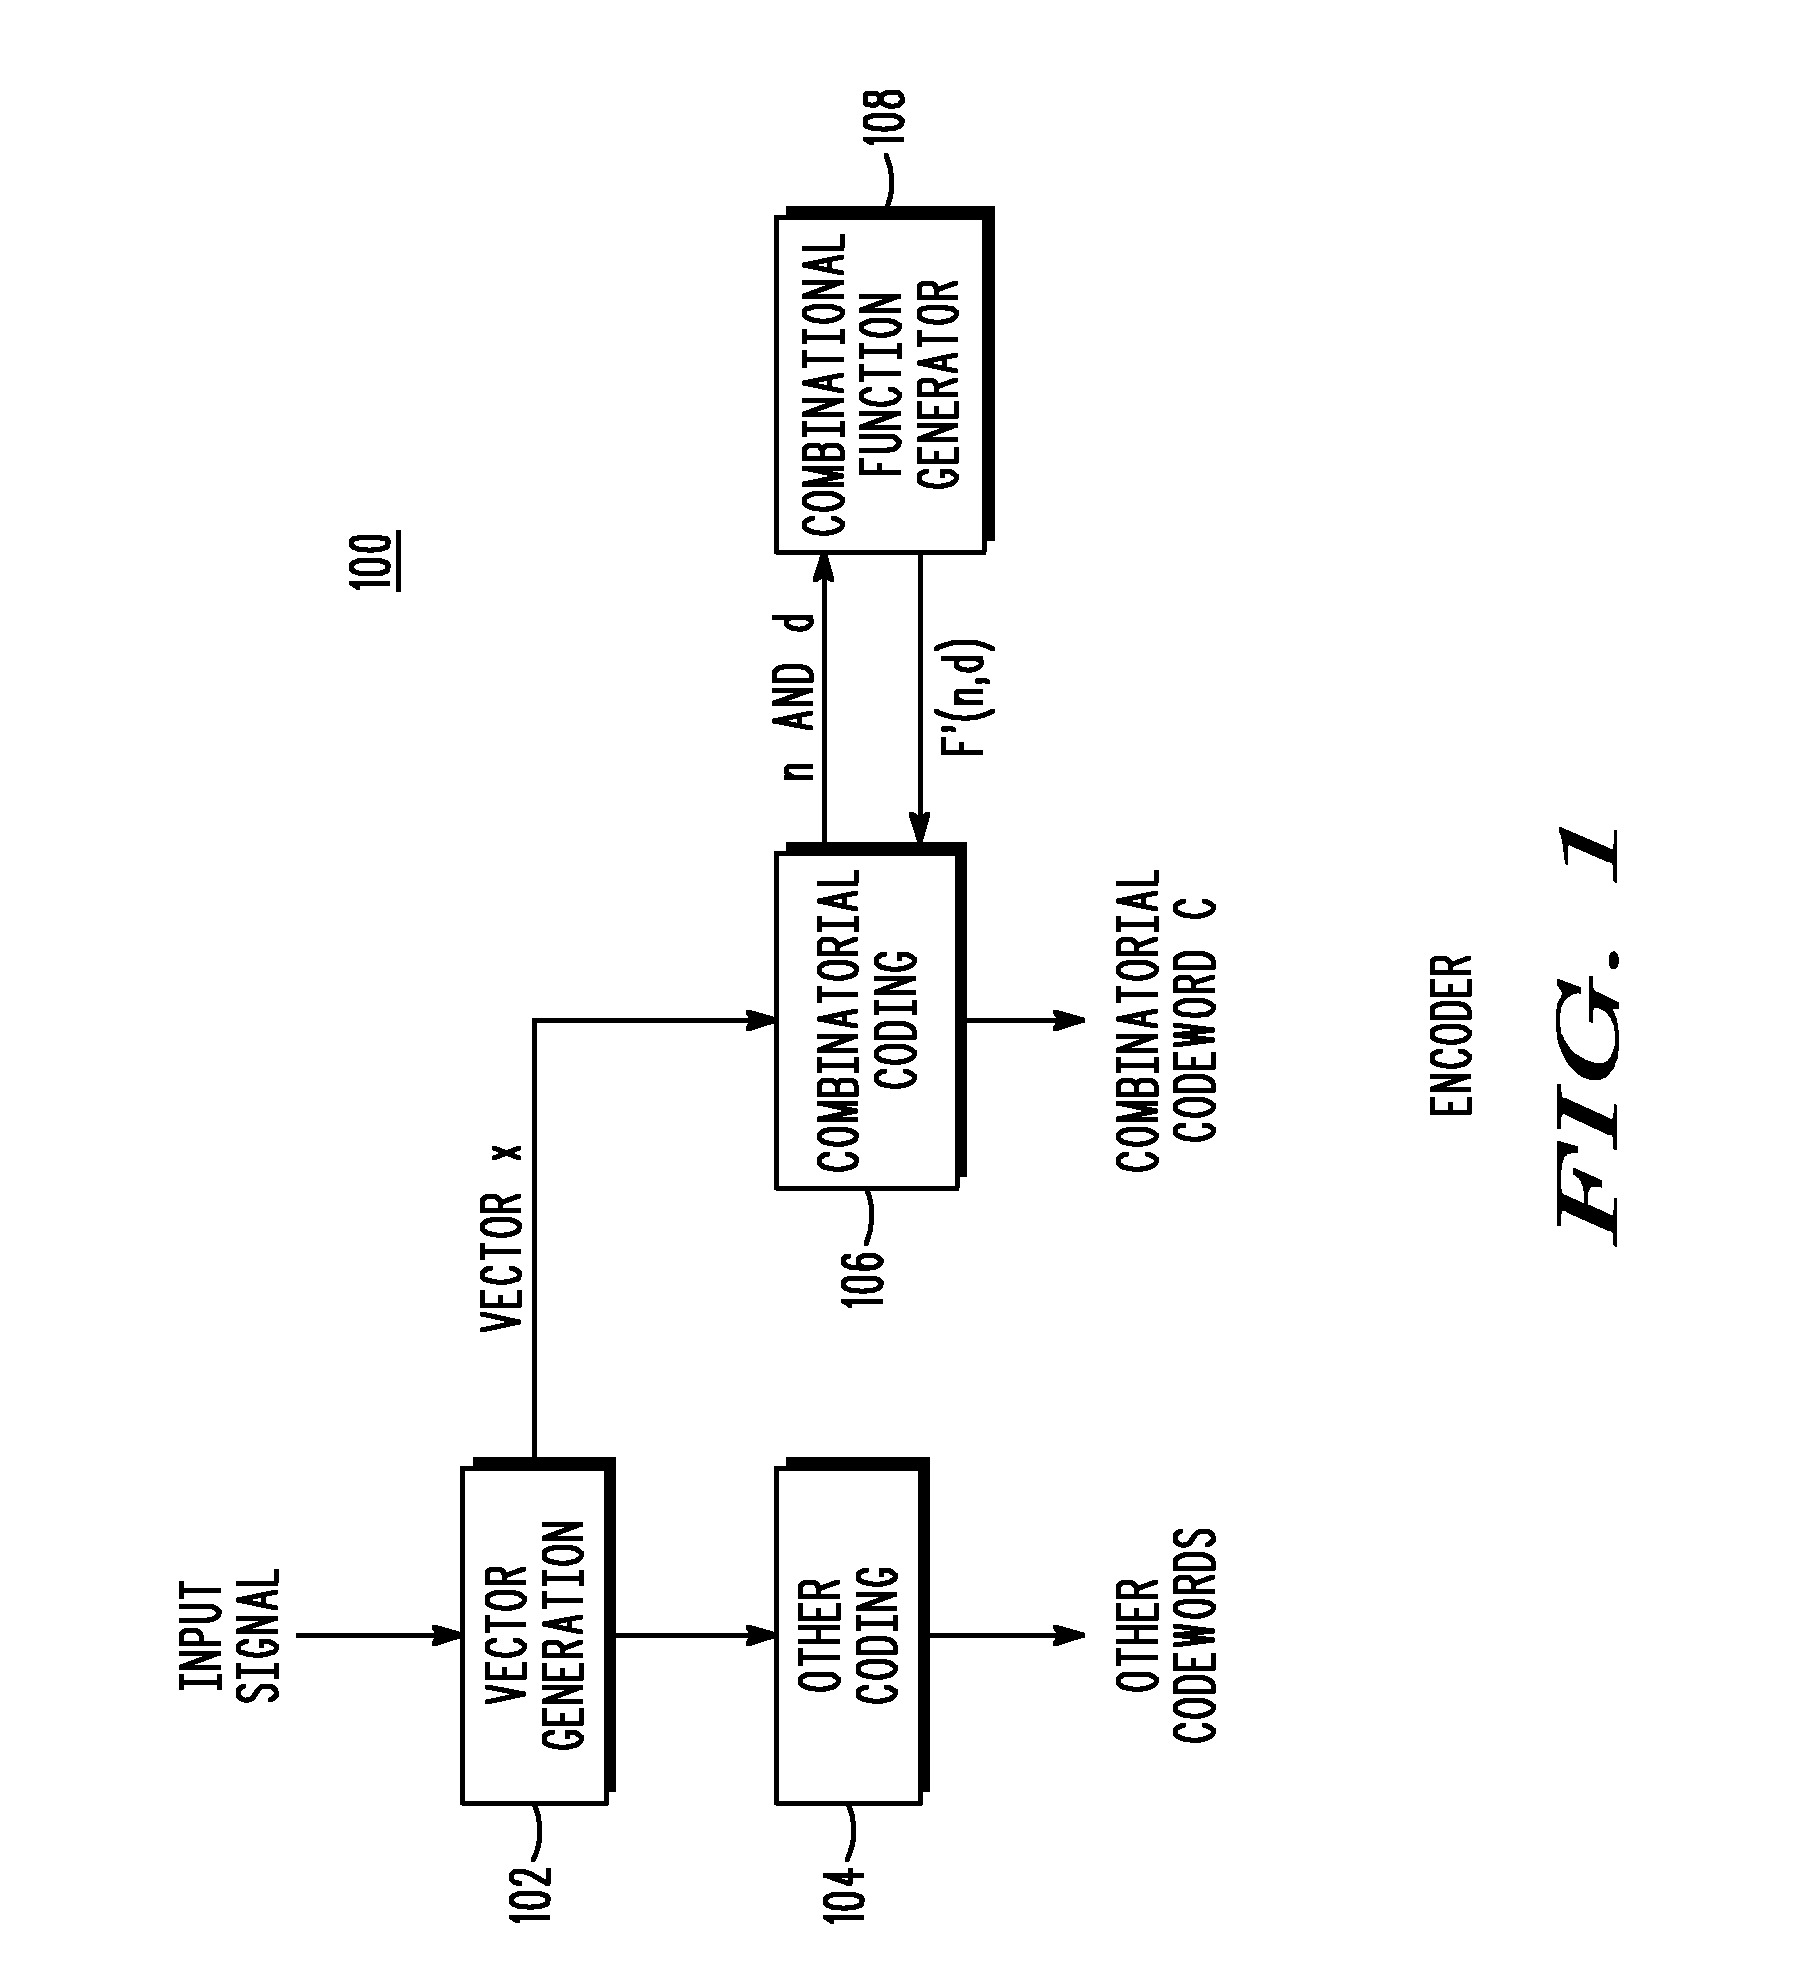 Method and Apparatus for Low Complexity Combinatorial Coding of Signals